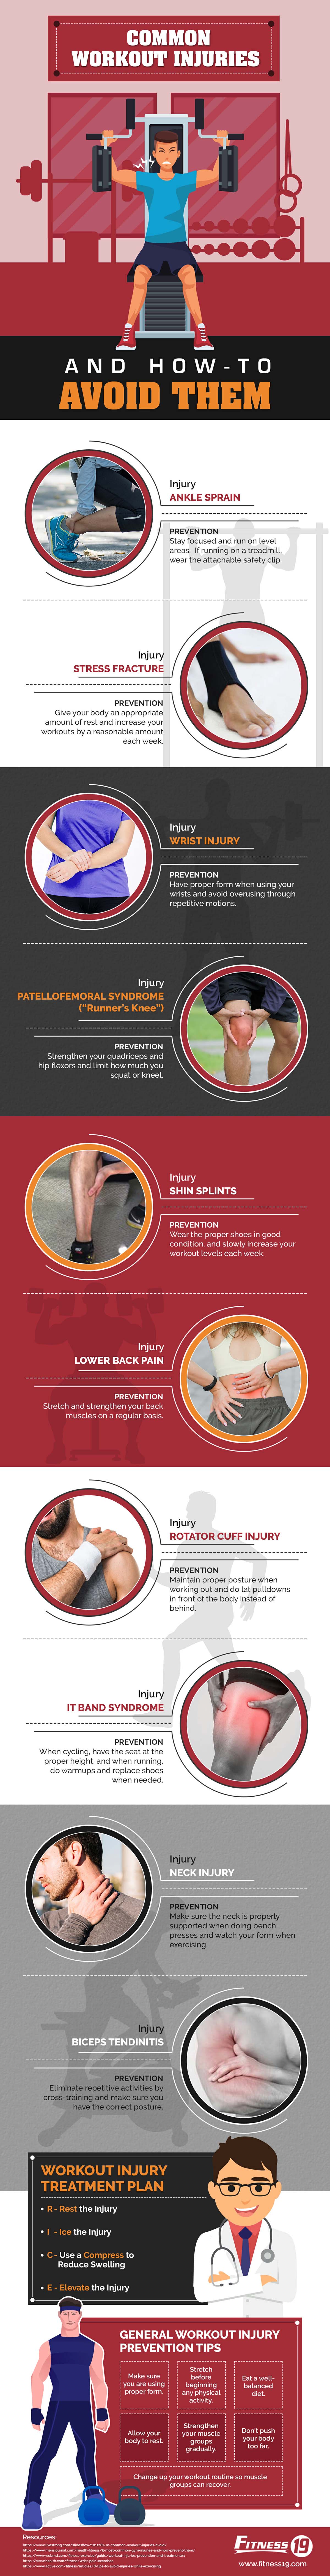 Common Workout Injuries and How-To Avoid Them